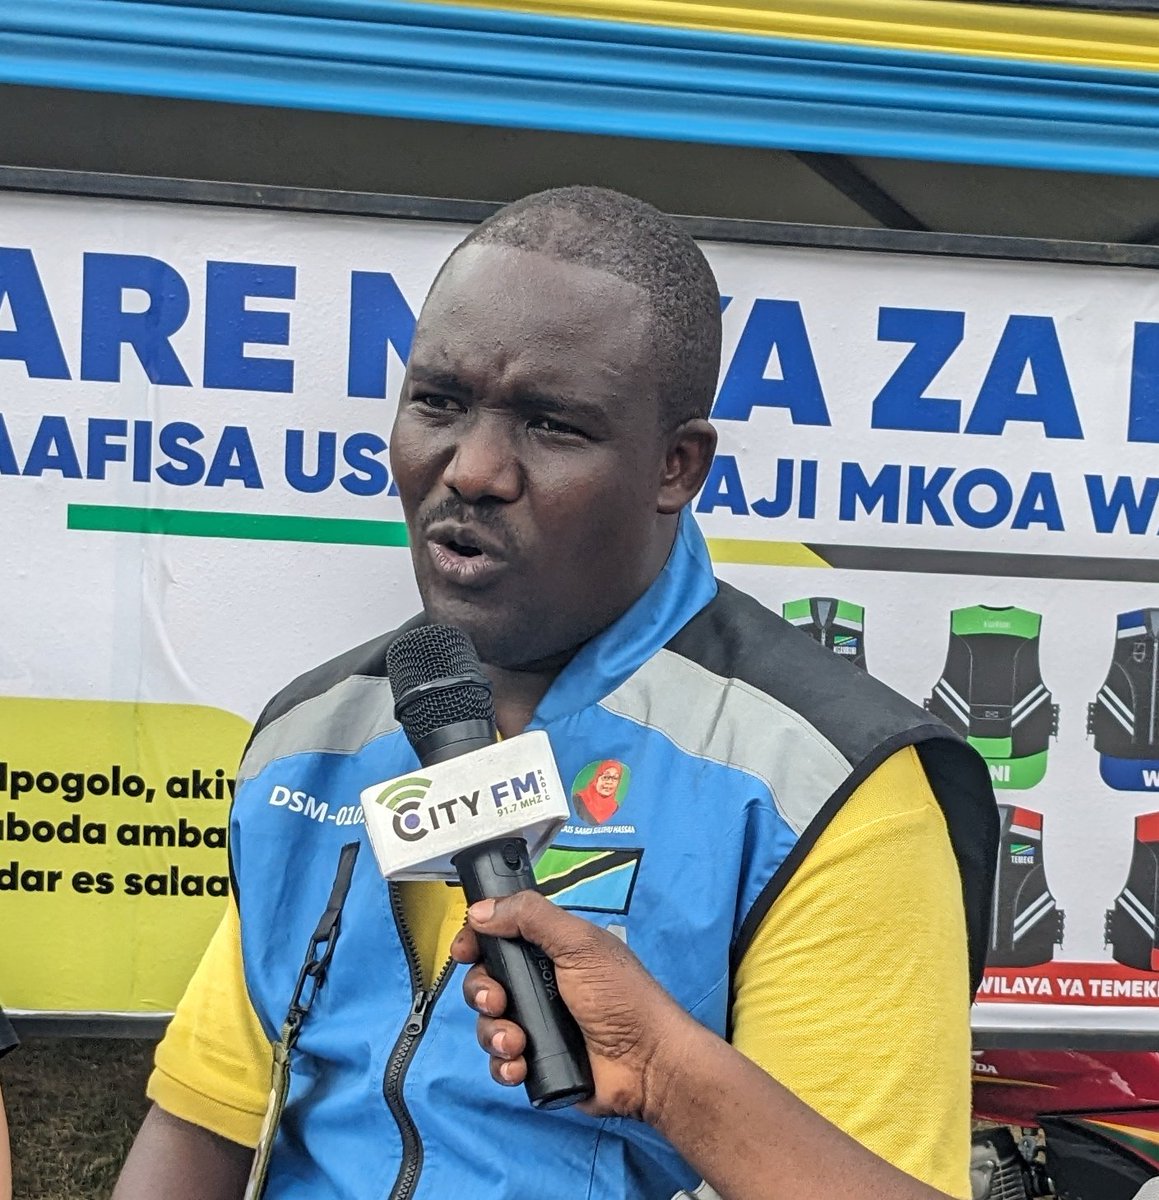 'In every 10 Commercial Motorcycles, 6-7 of them experience accidents that have given them bruises and sores that have left scars.Taking precautions by wearing safety equipment and having insurance for each Commercial Motorcycles is cruasual for their wellbeing' Bodaboda-Ilala.